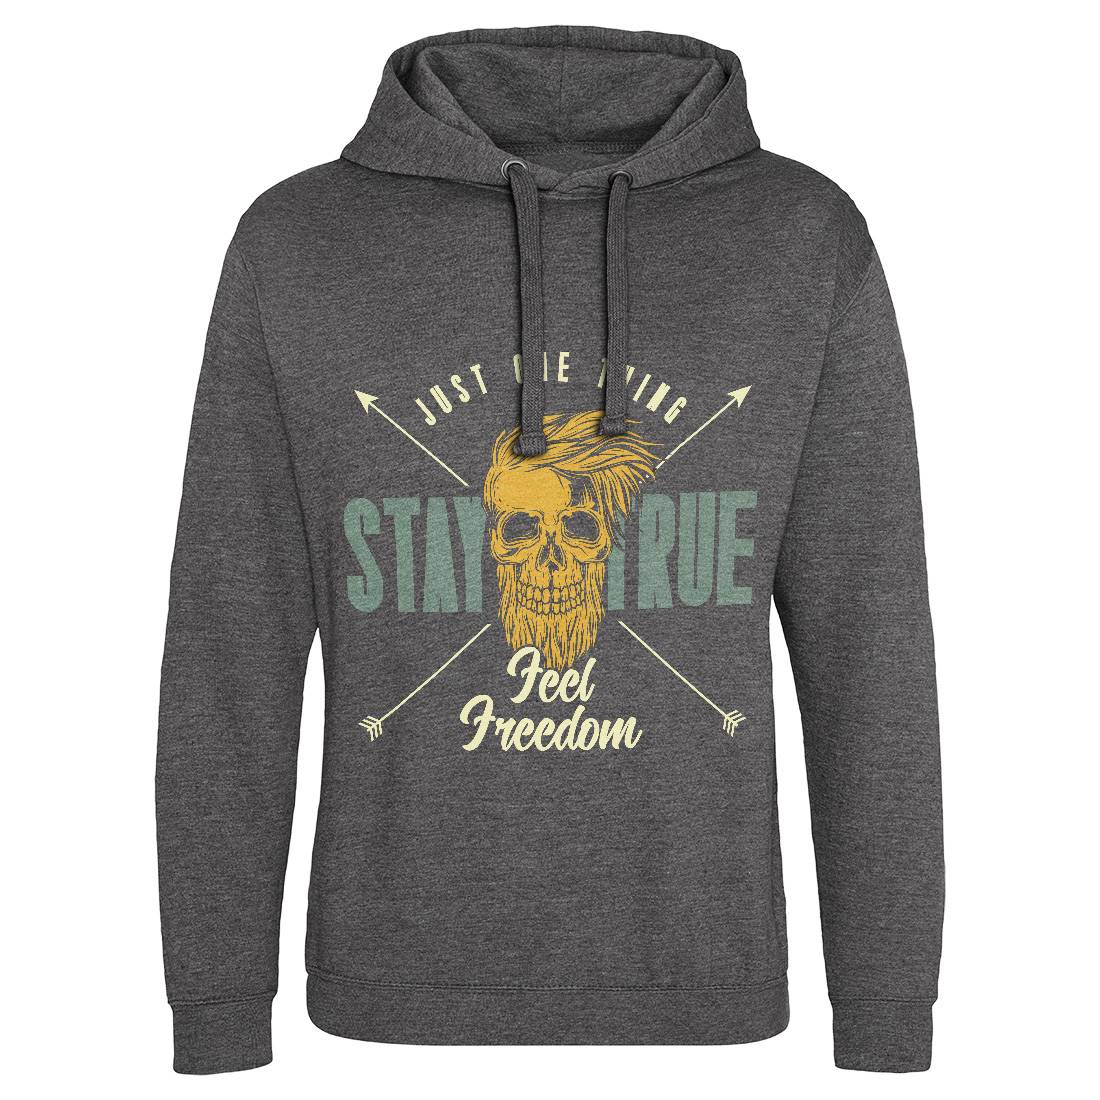 Stay True Mens Hoodie Without Pocket Barber C851